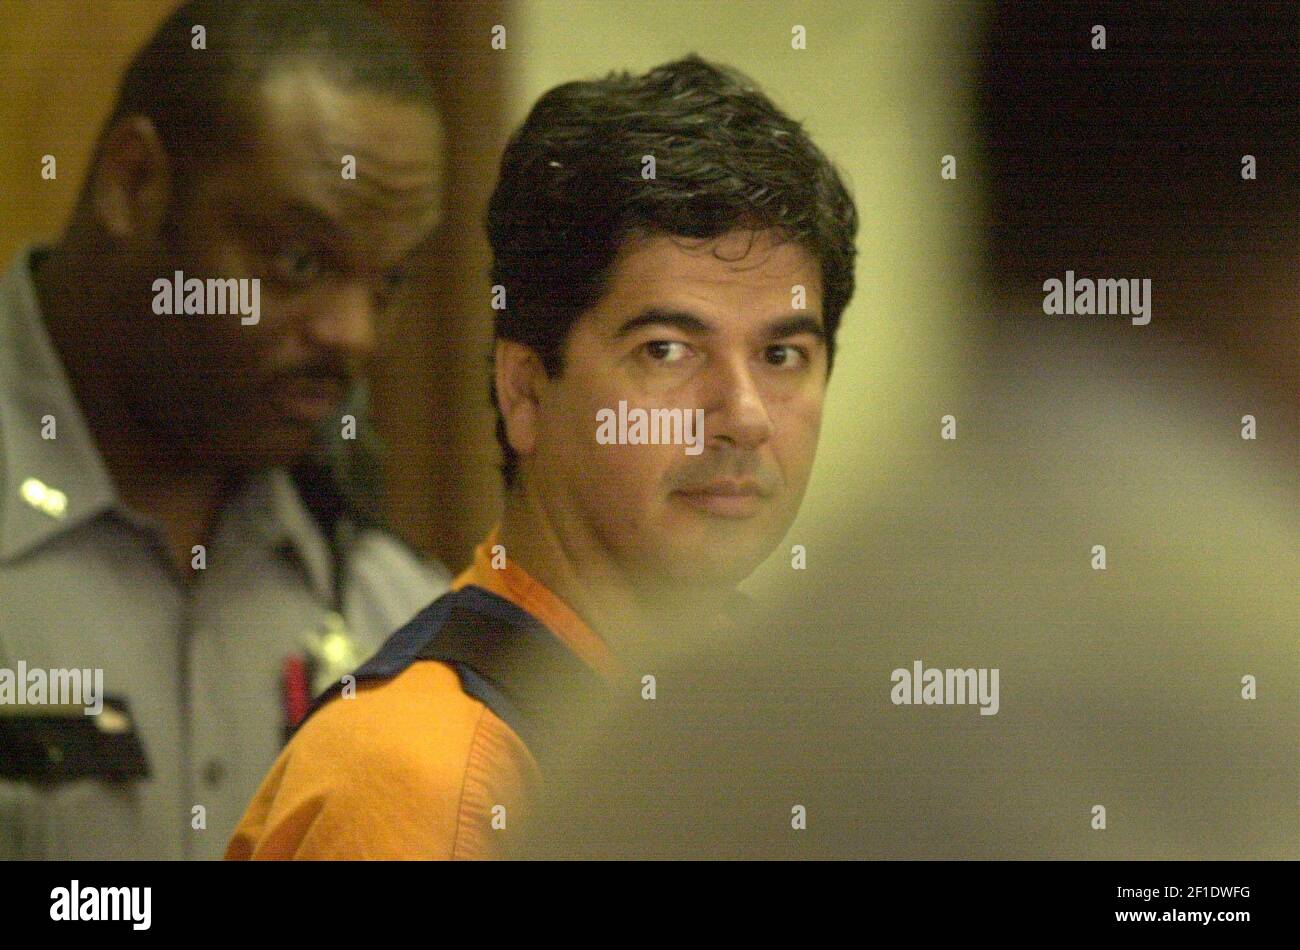 Nov 2, 2000; Augusta, GA, USA; Reinaldo J. Rivera appears in a Richmond County court Thursday to face charges, including rape, sodomy, assault and murder, to which he pleaded not guilty. Mandatory Credit: Jonathan Ernst/The Augusta Chronicle via USA TODAY NETWORK/Sipa USA Stock Photo